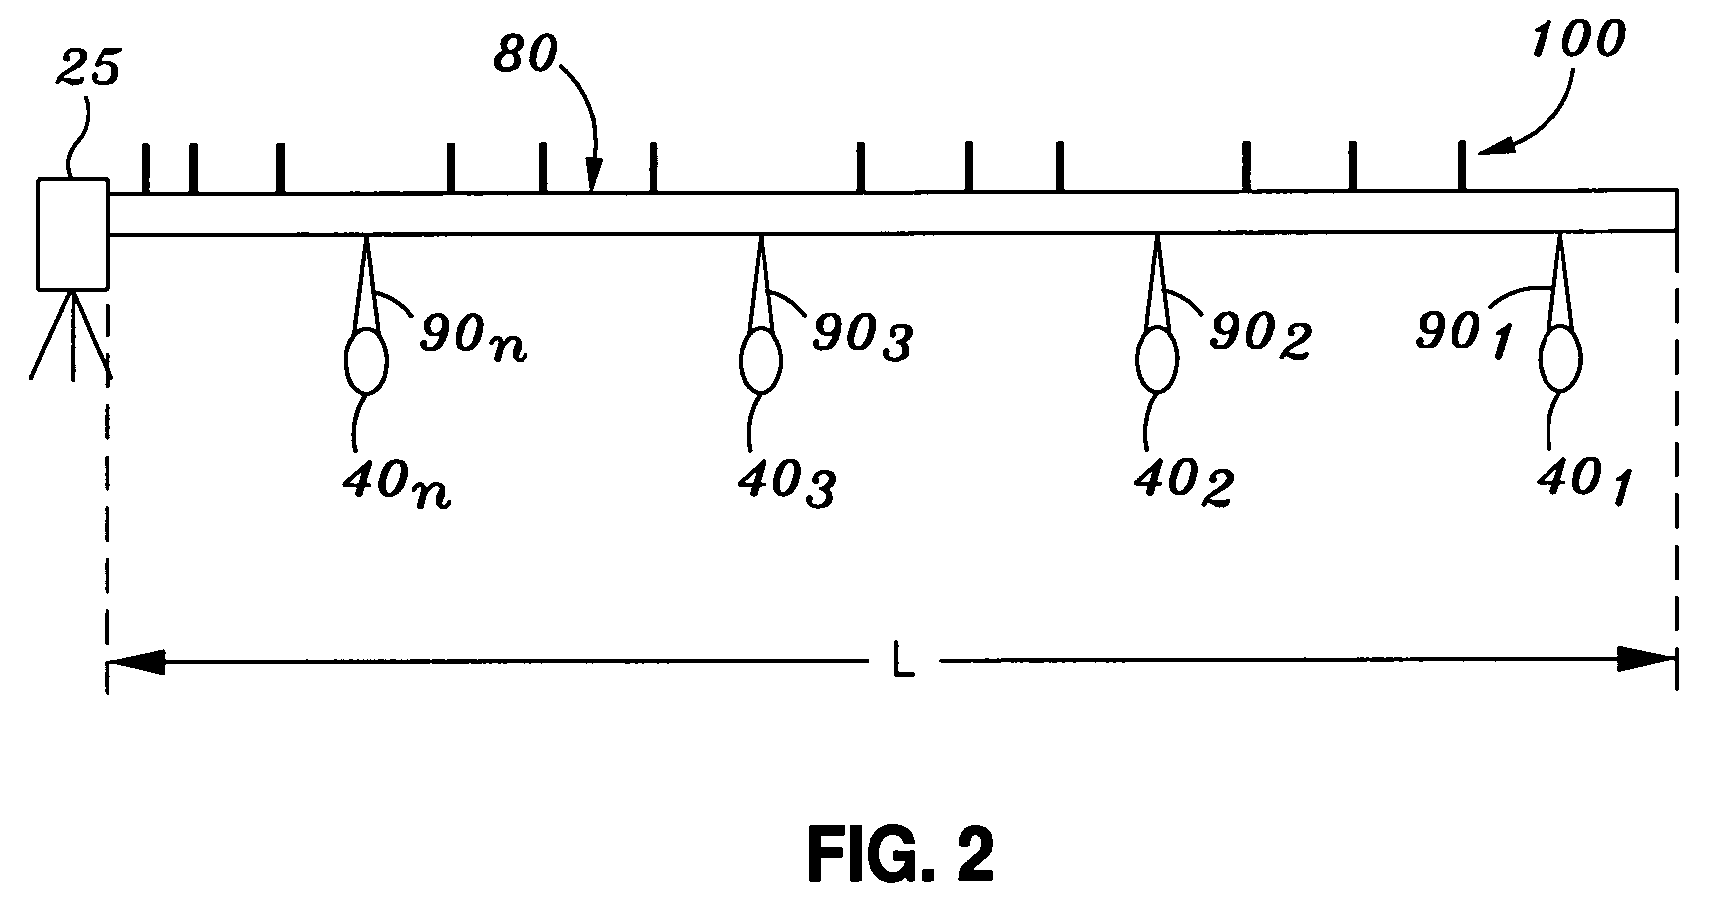 System and method for determining a pivot center and radius based on a least squares approach